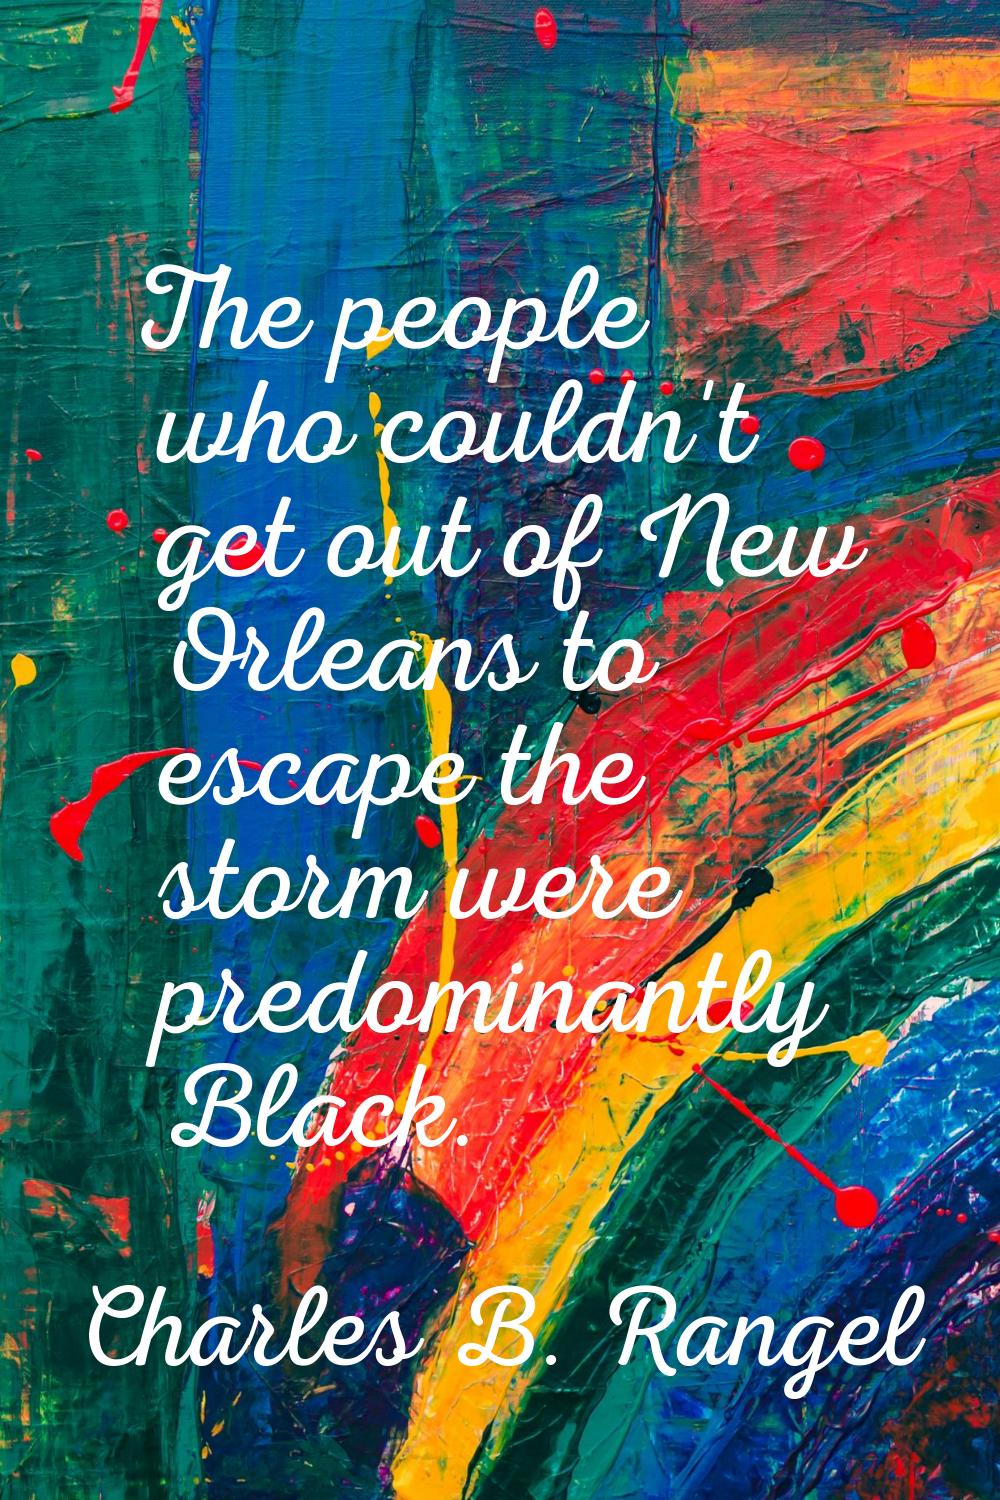 The people who couldn't get out of New Orleans to escape the storm were predominantly Black.